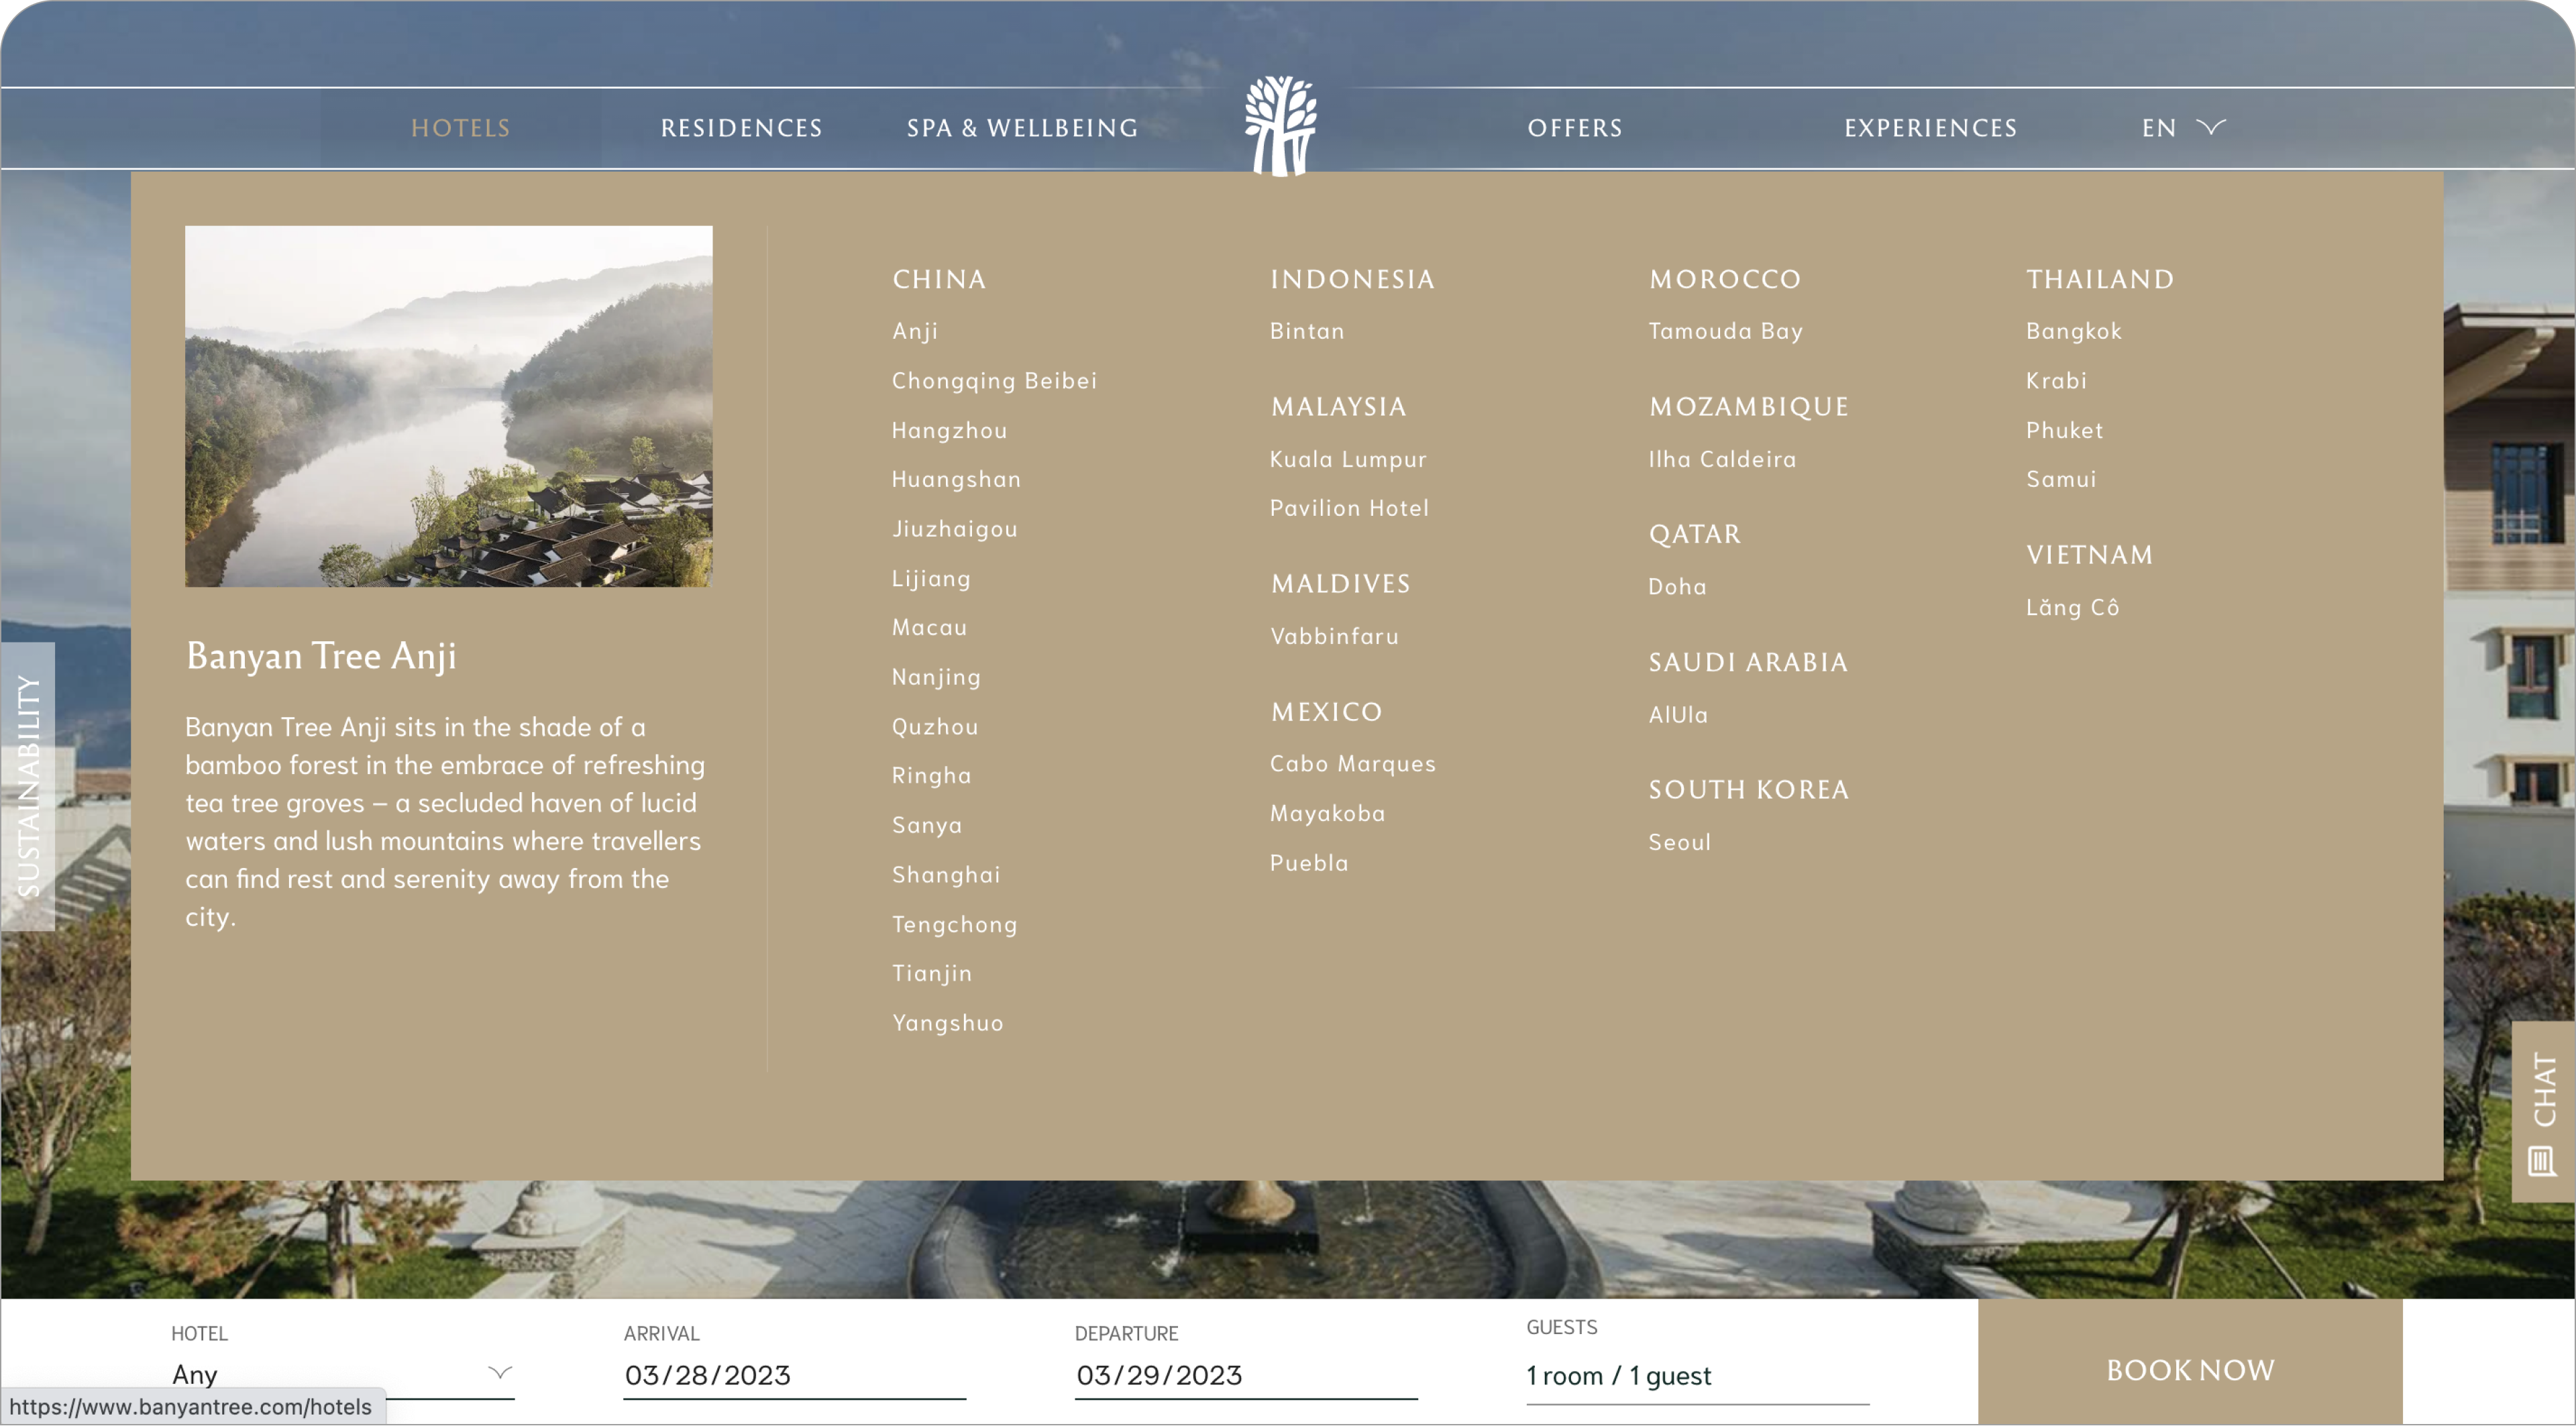 ITC added a Mega Menu for Banyan Tree so that users can easily find the country destinations and hotels they are interested in